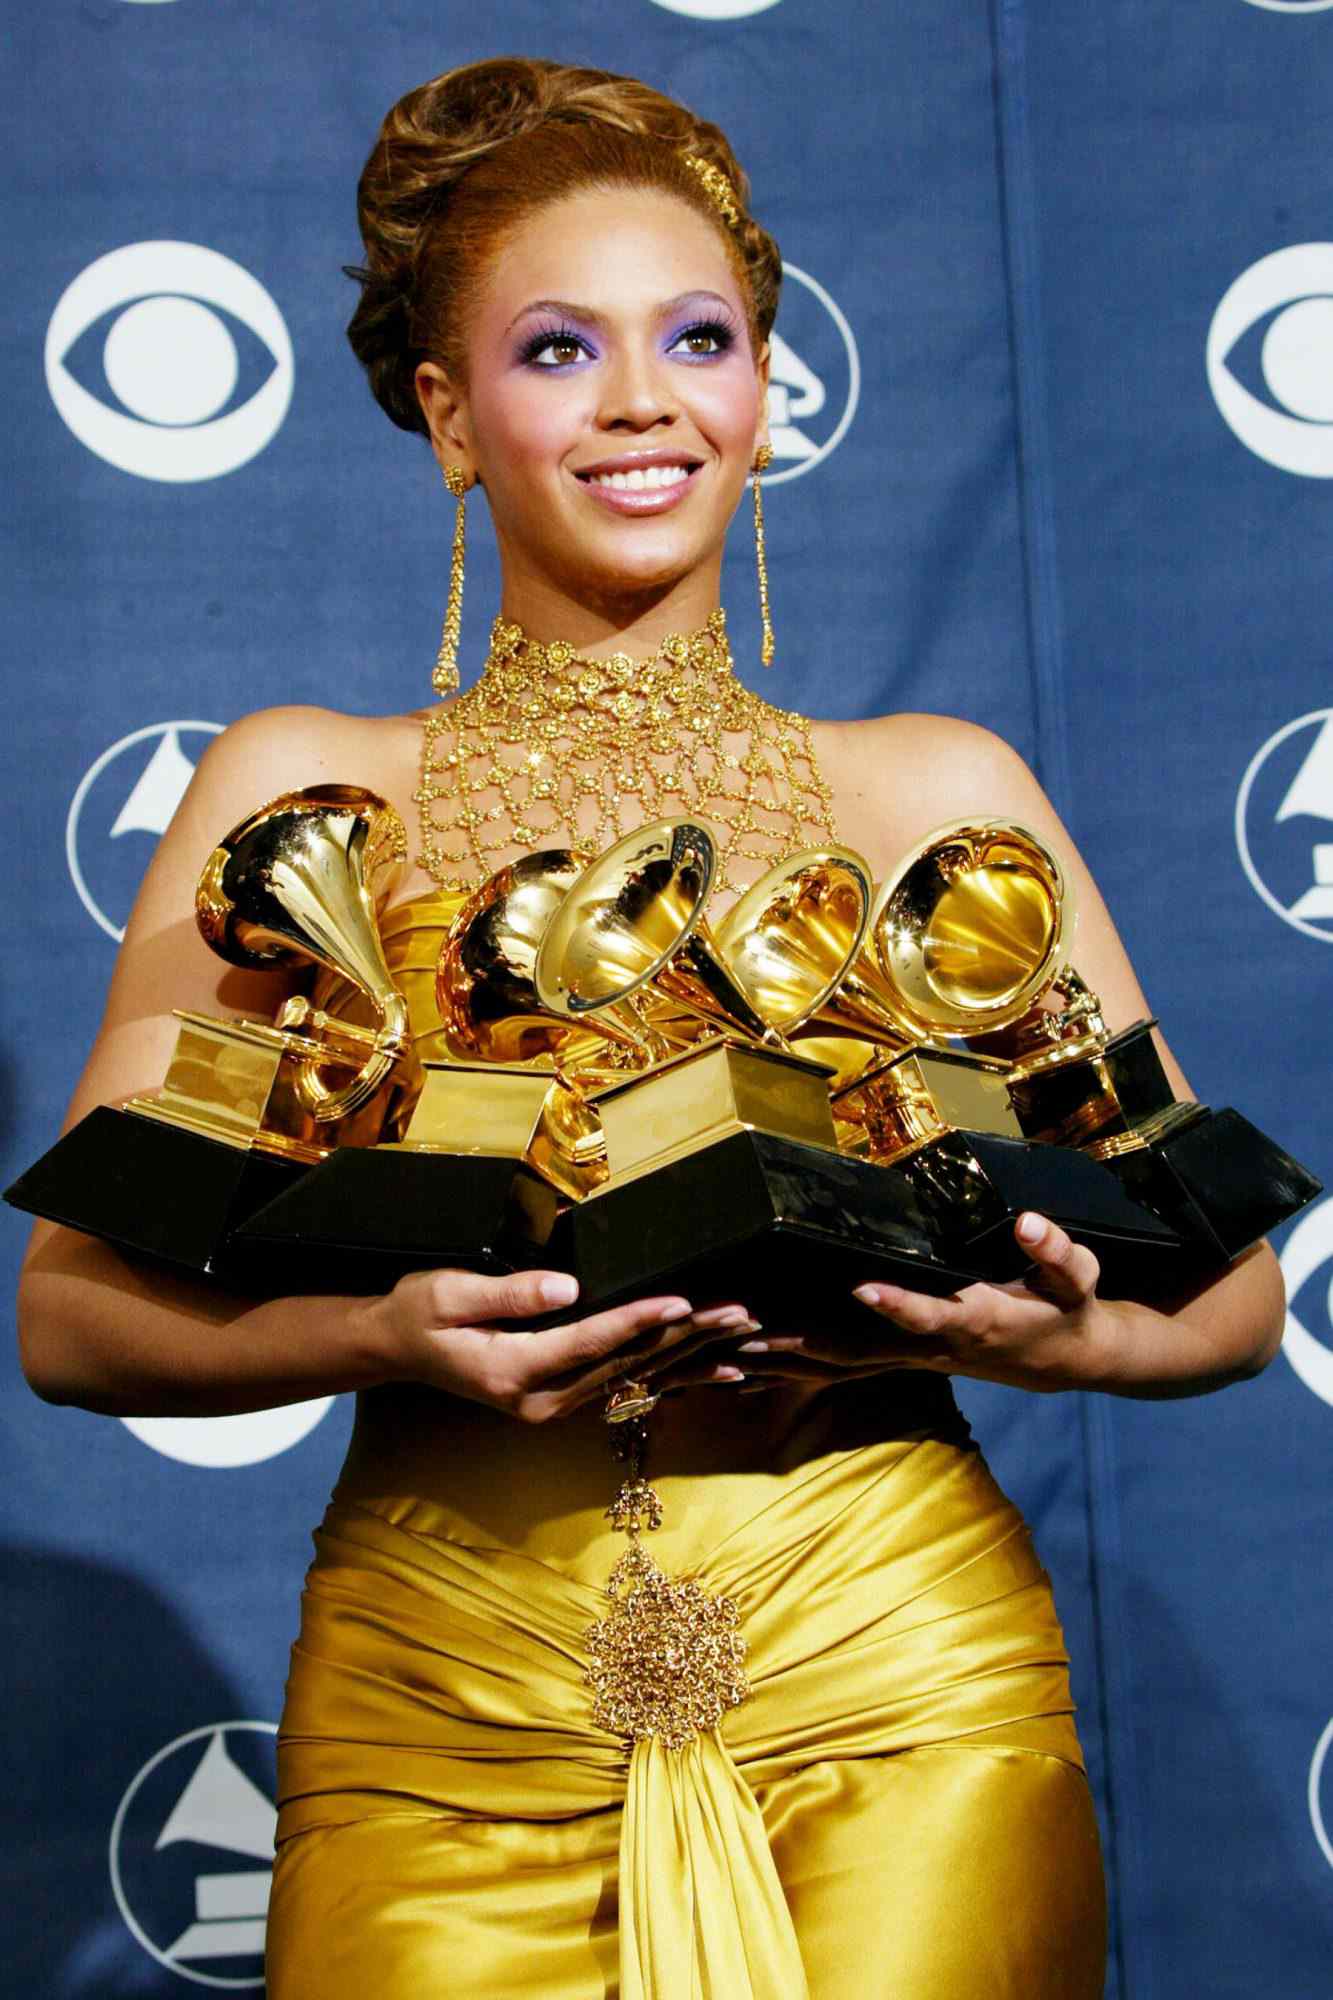 Beyoncé at the 46th annual Grammy Awards at the Staples Center on Feb. 8, 2004